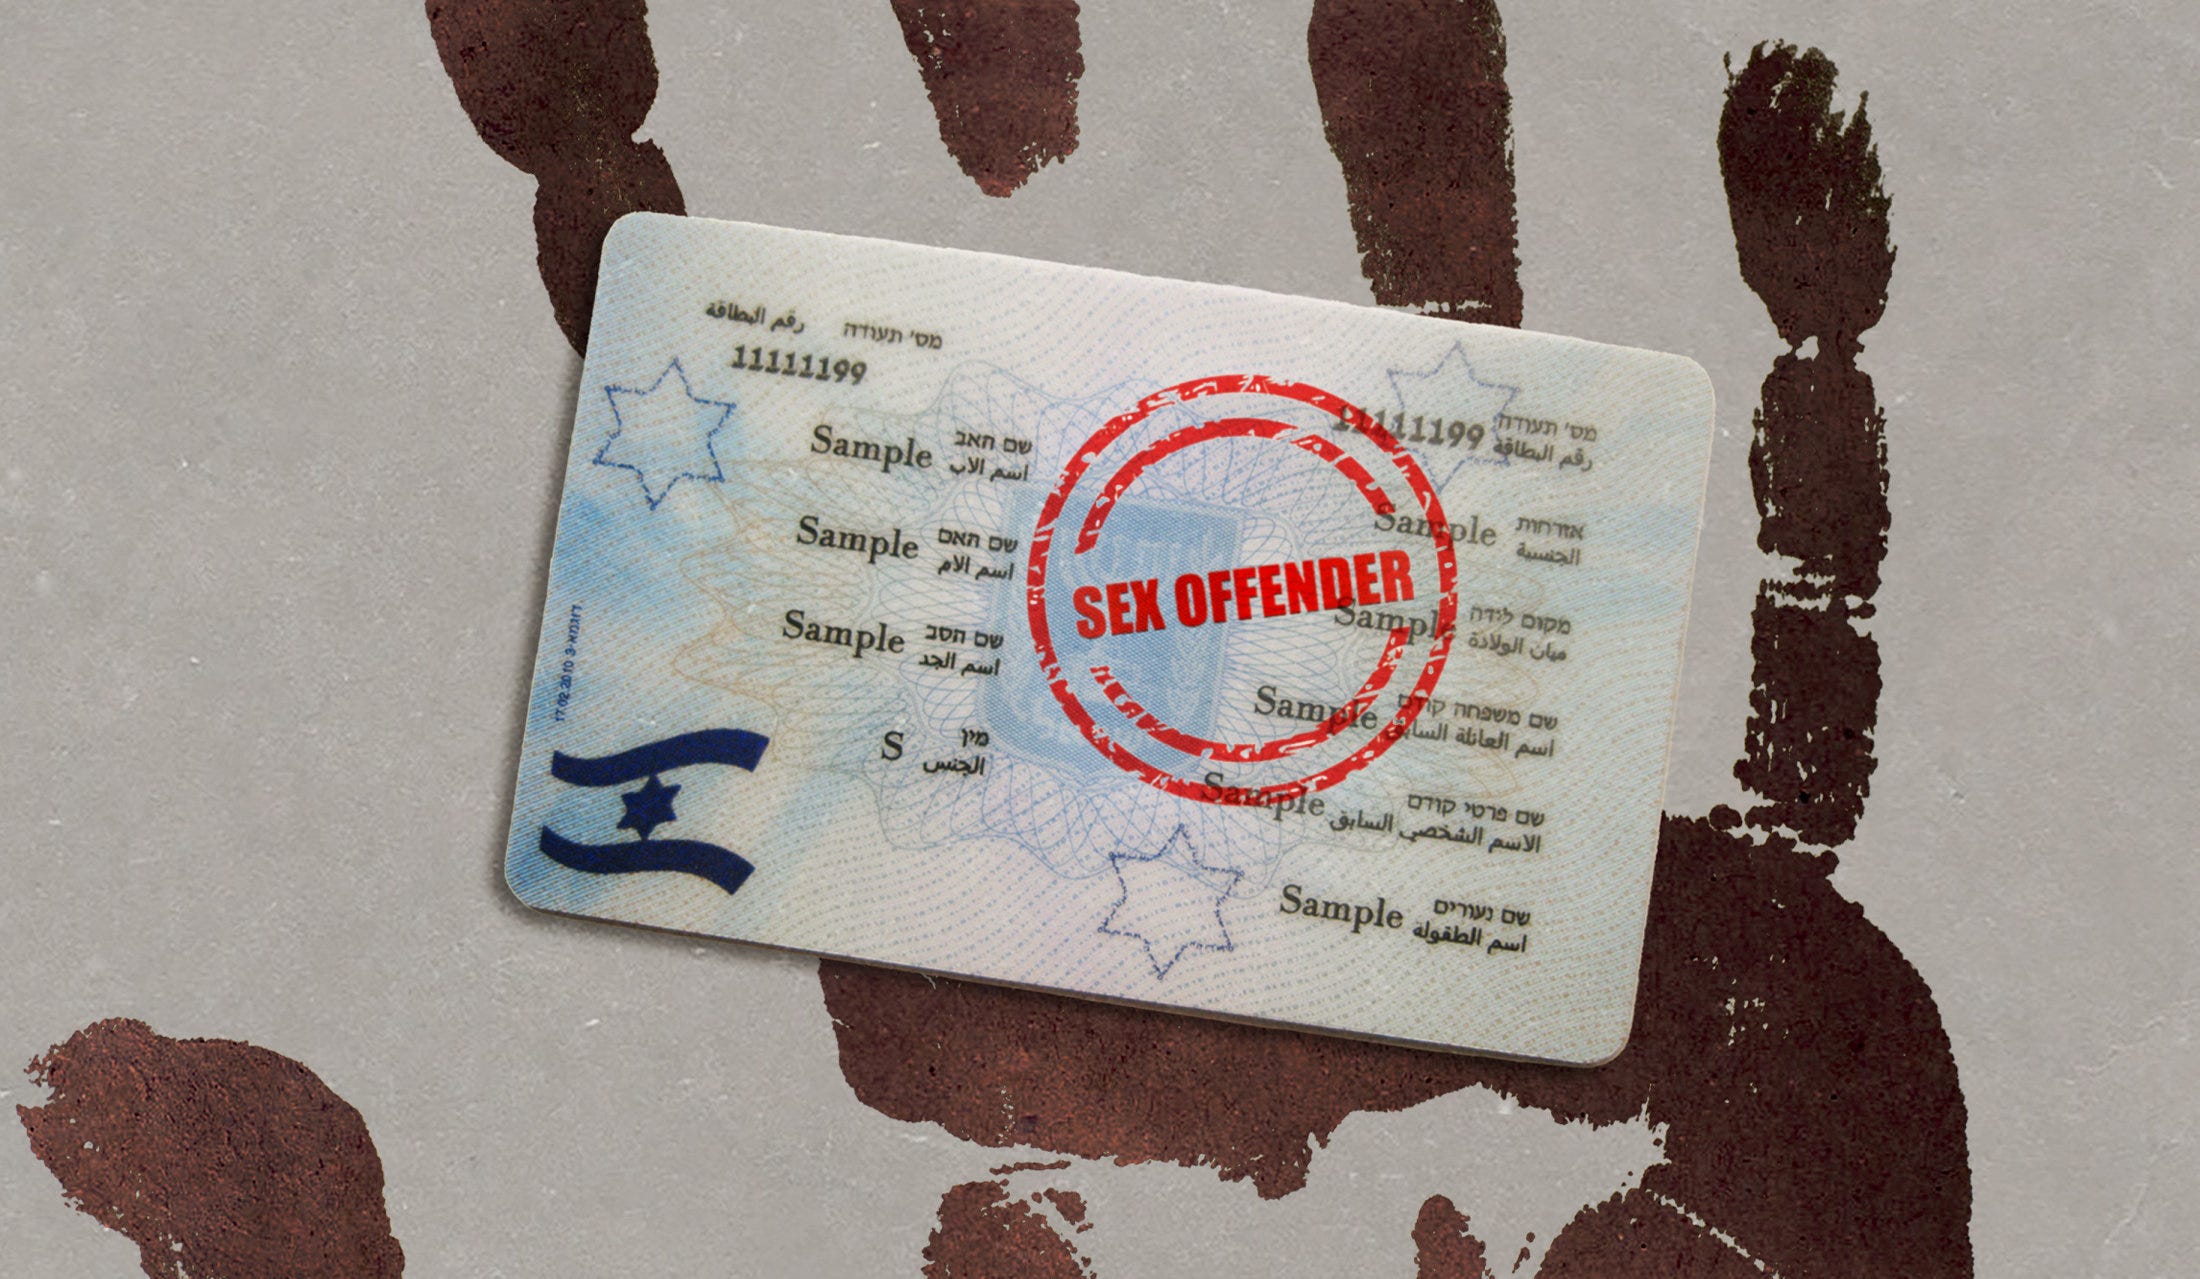 'Tip of the iceberg': How foreign sex offenders find refuge in Israel